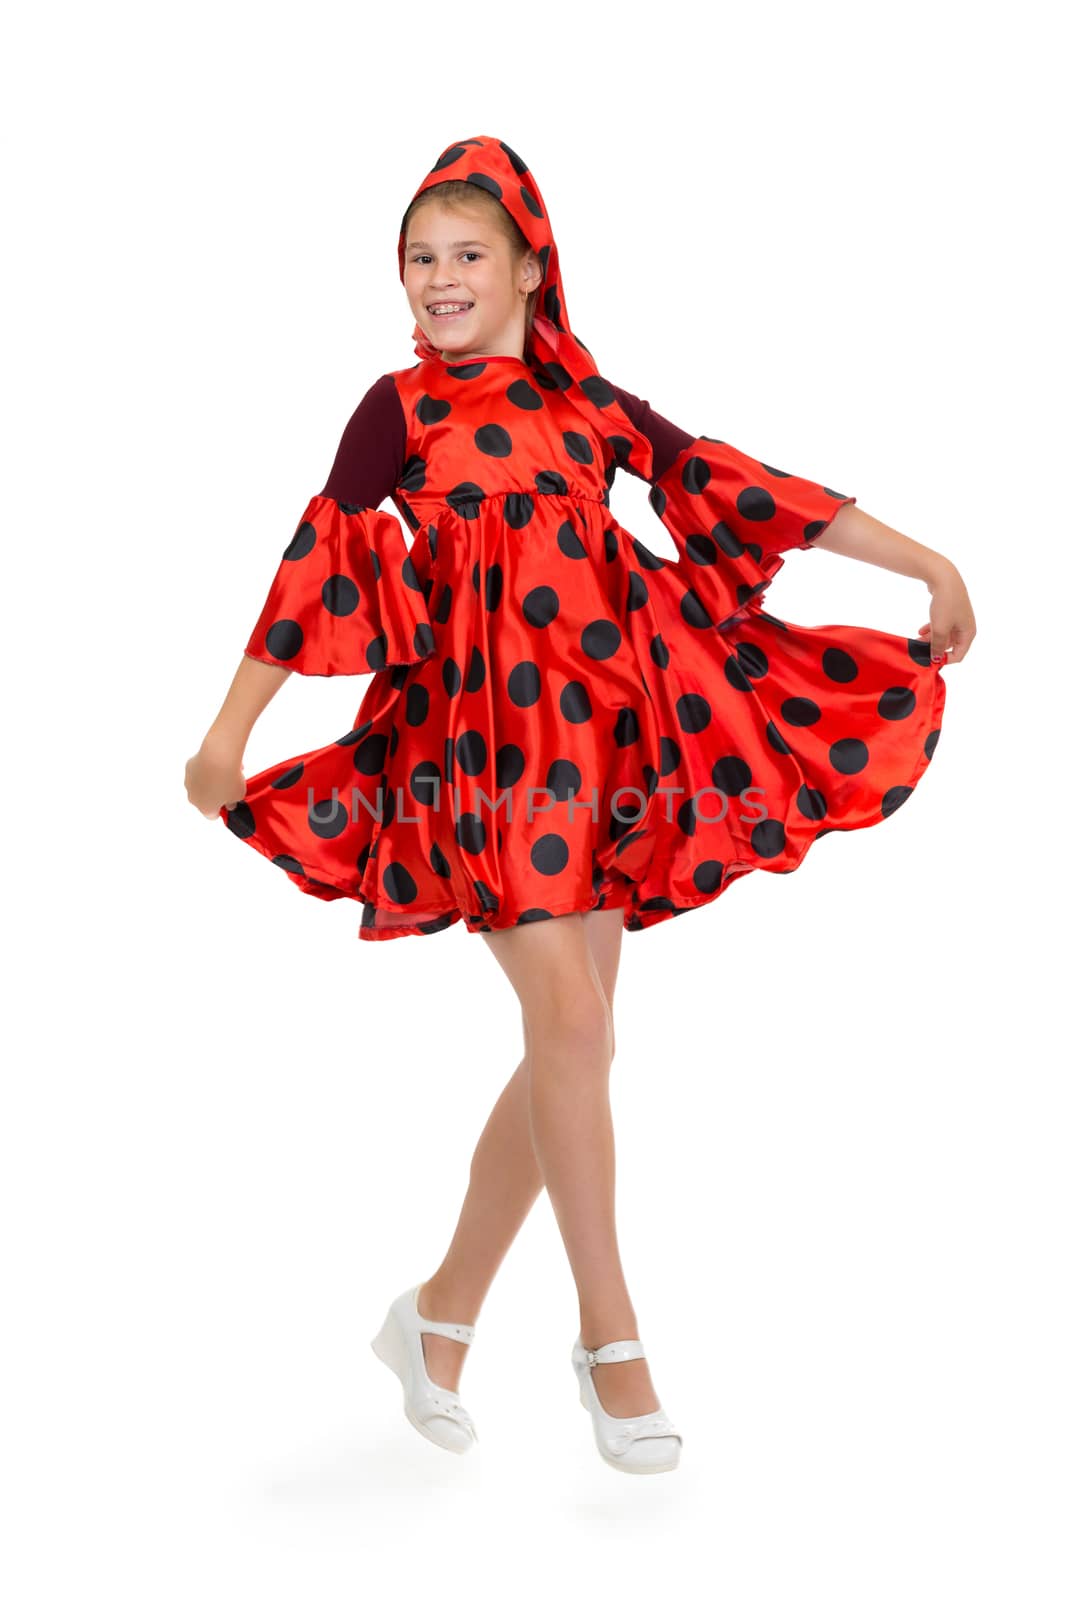 Girl dancing in a red polka-dot dress. Isolate on white.